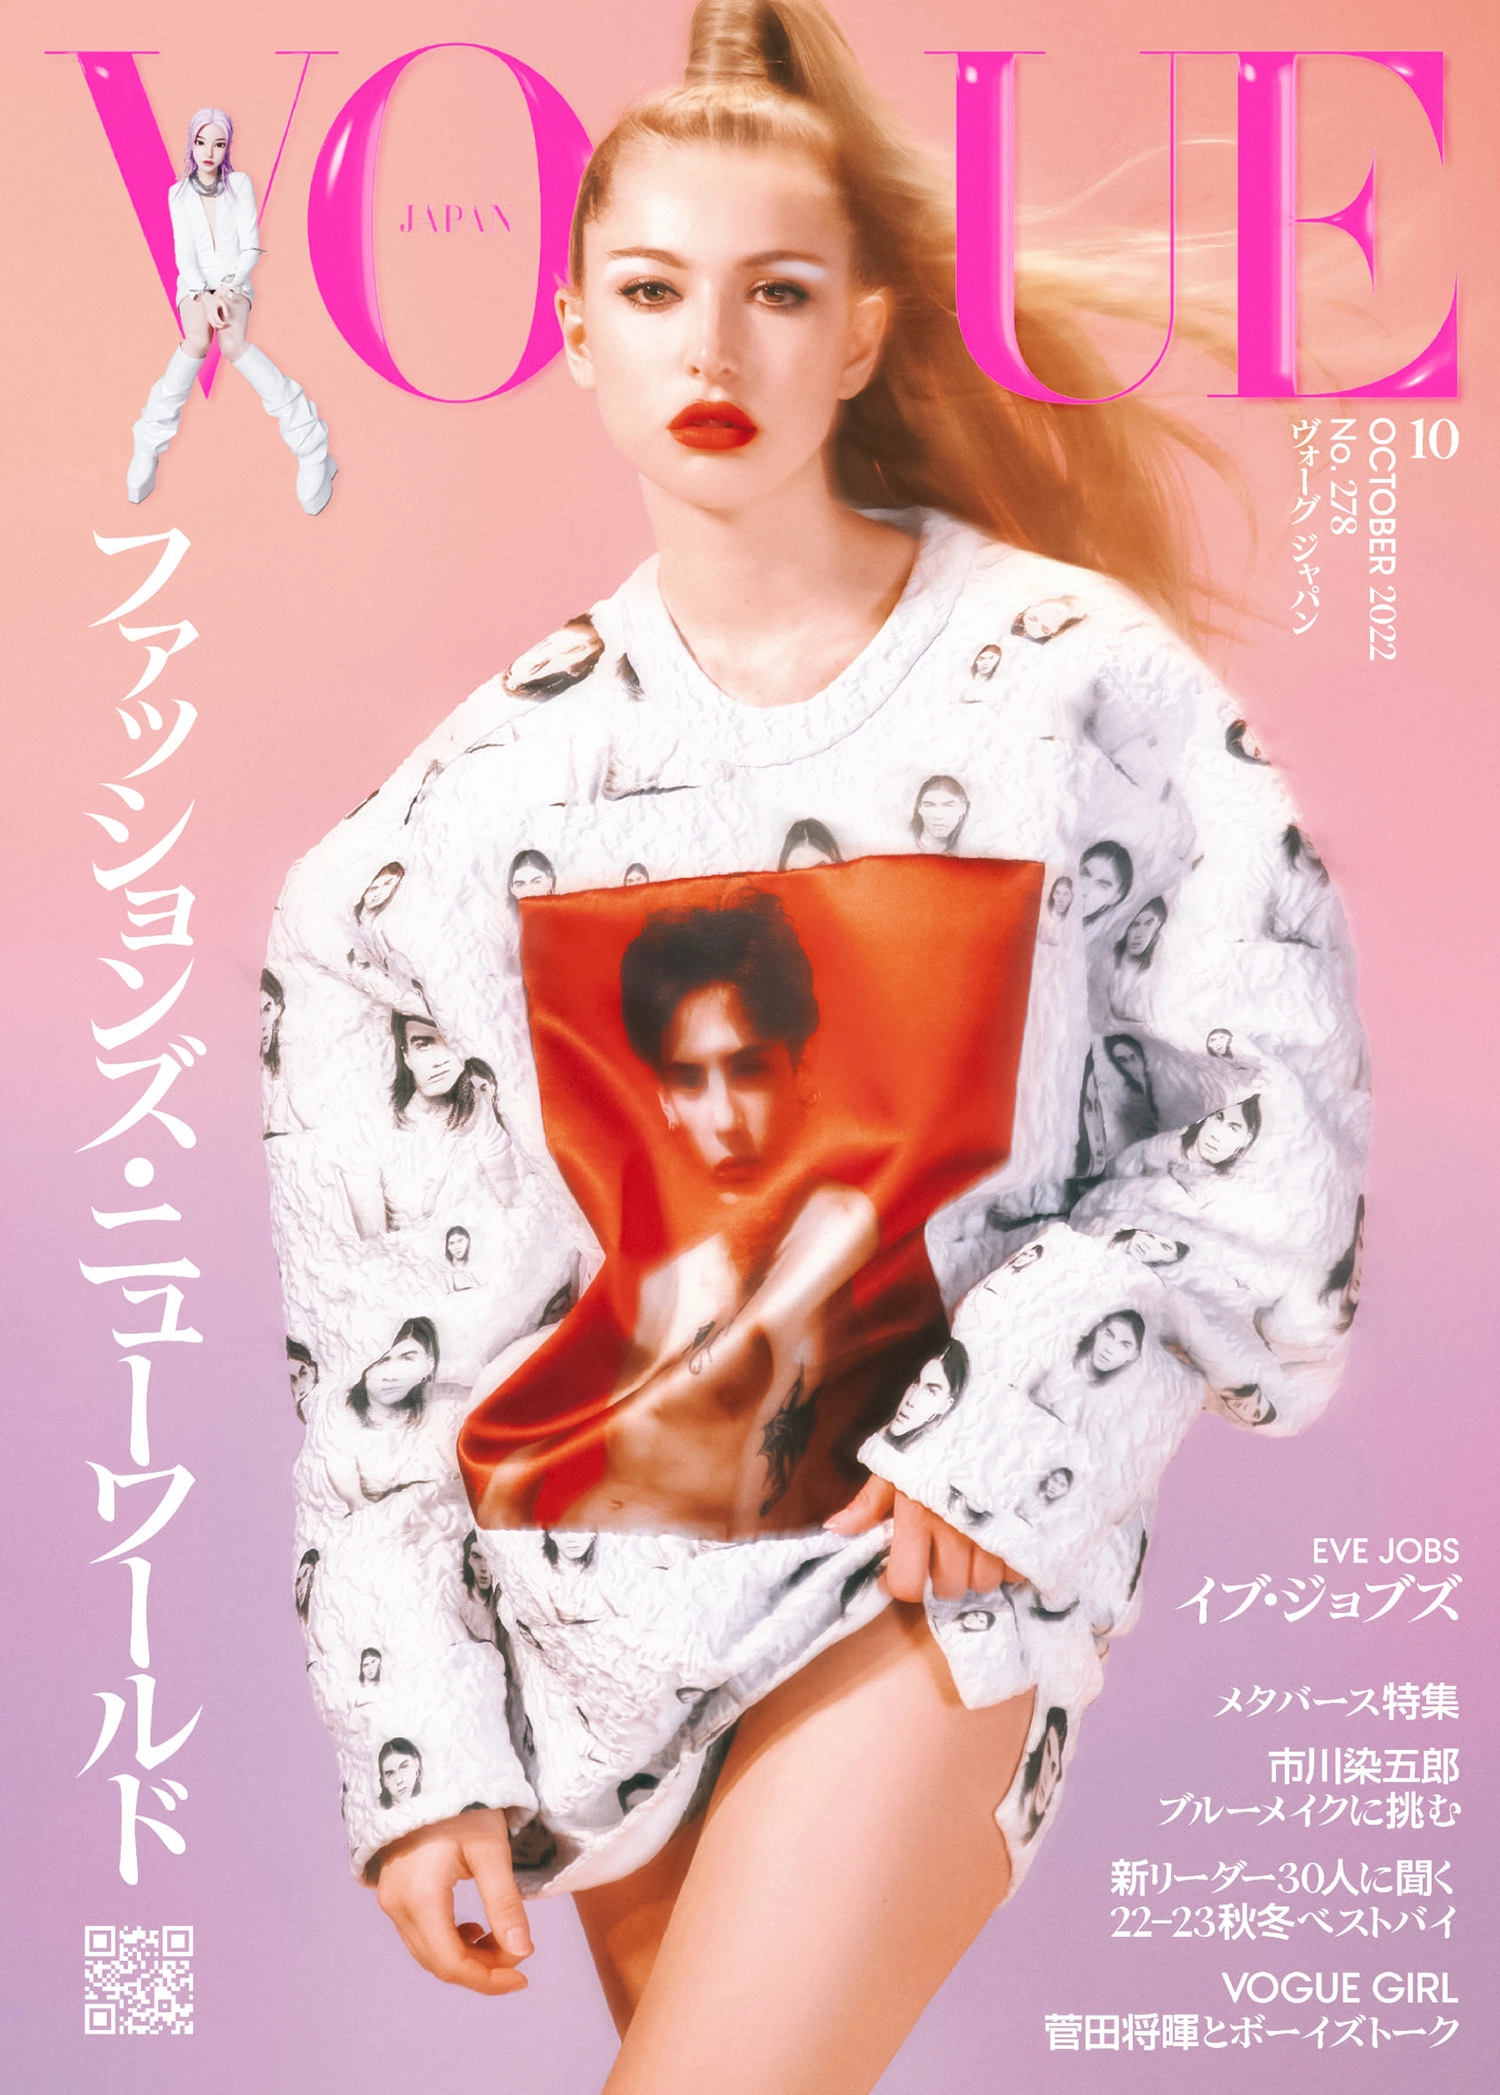 Eve Jobs covers Vogue Japan October 2022 by Heji Shin